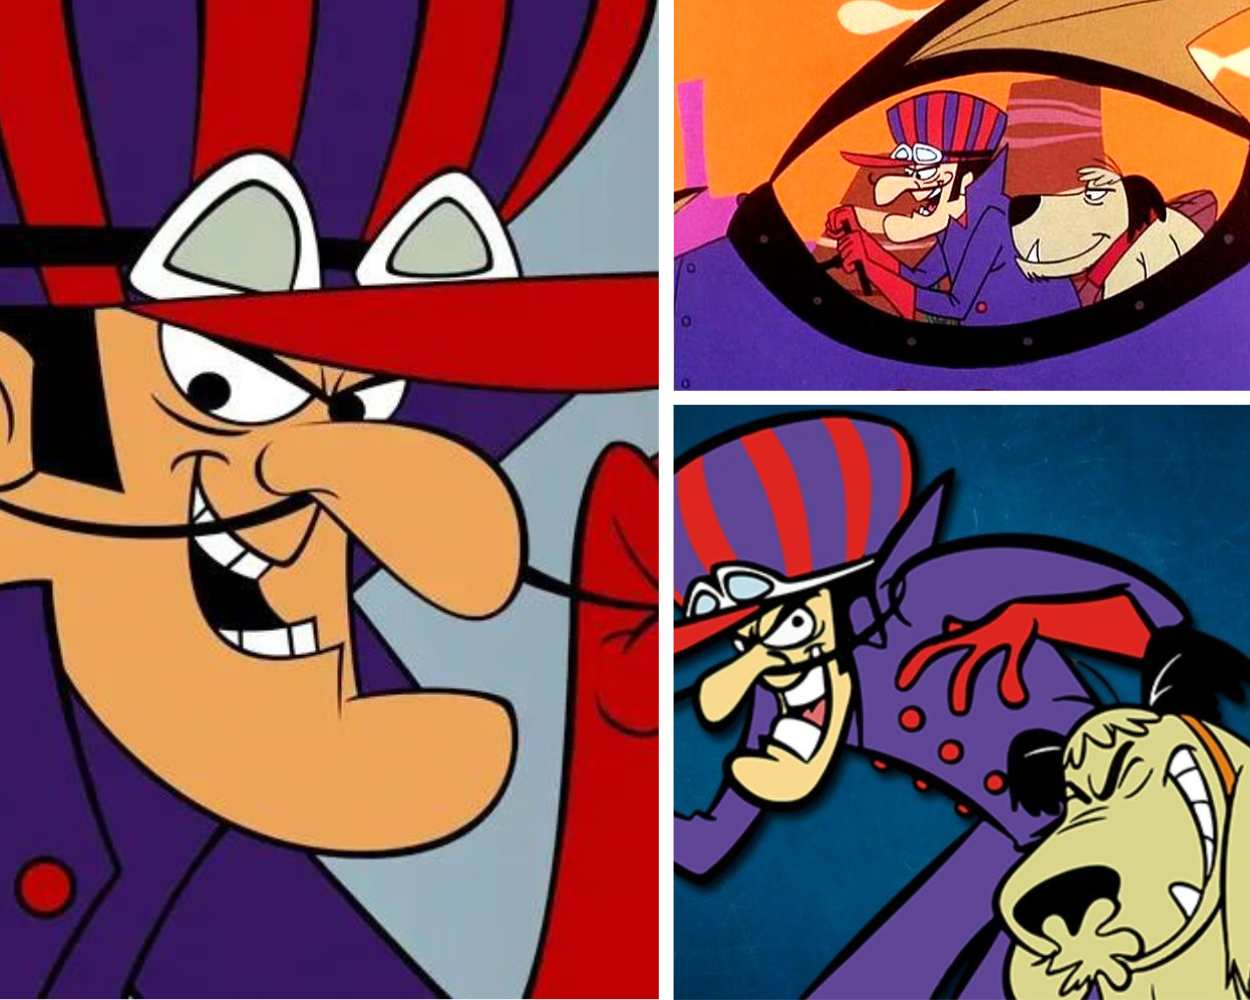 Dick Dastardly - long nosed characters